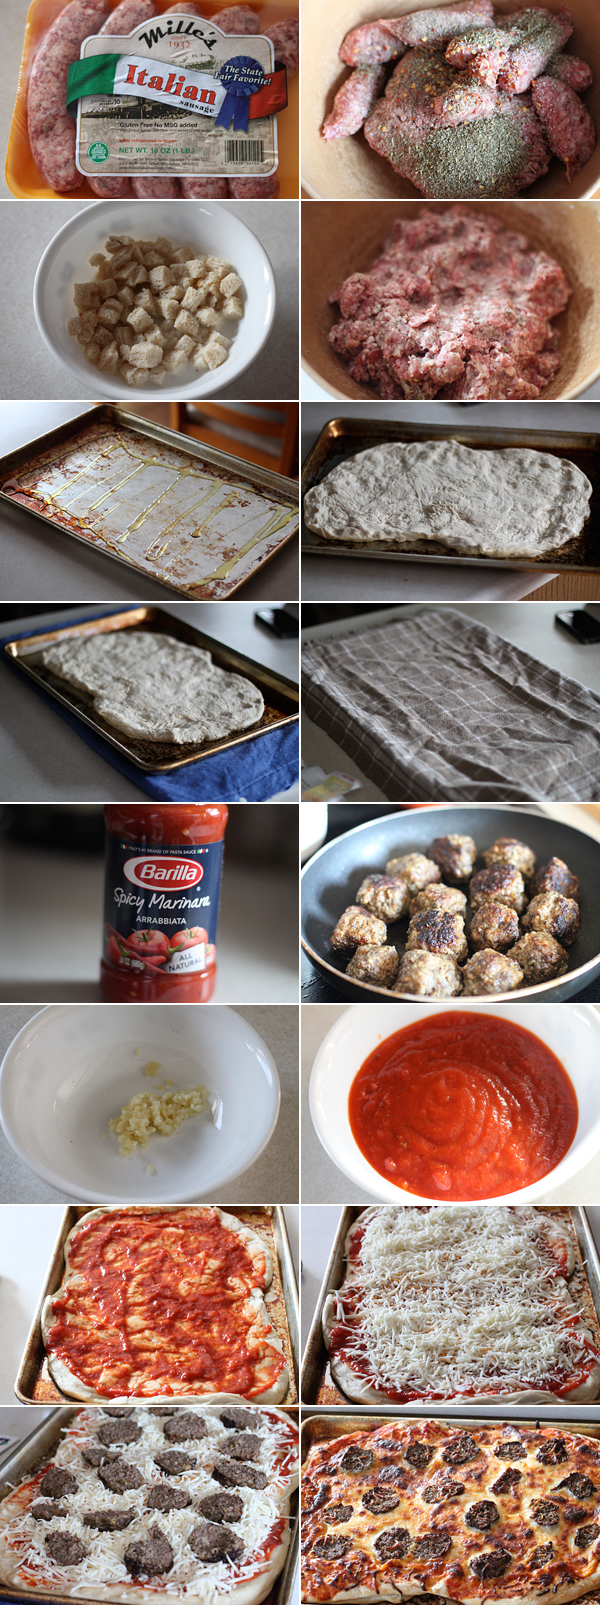 How to make a meatball pizza recipe